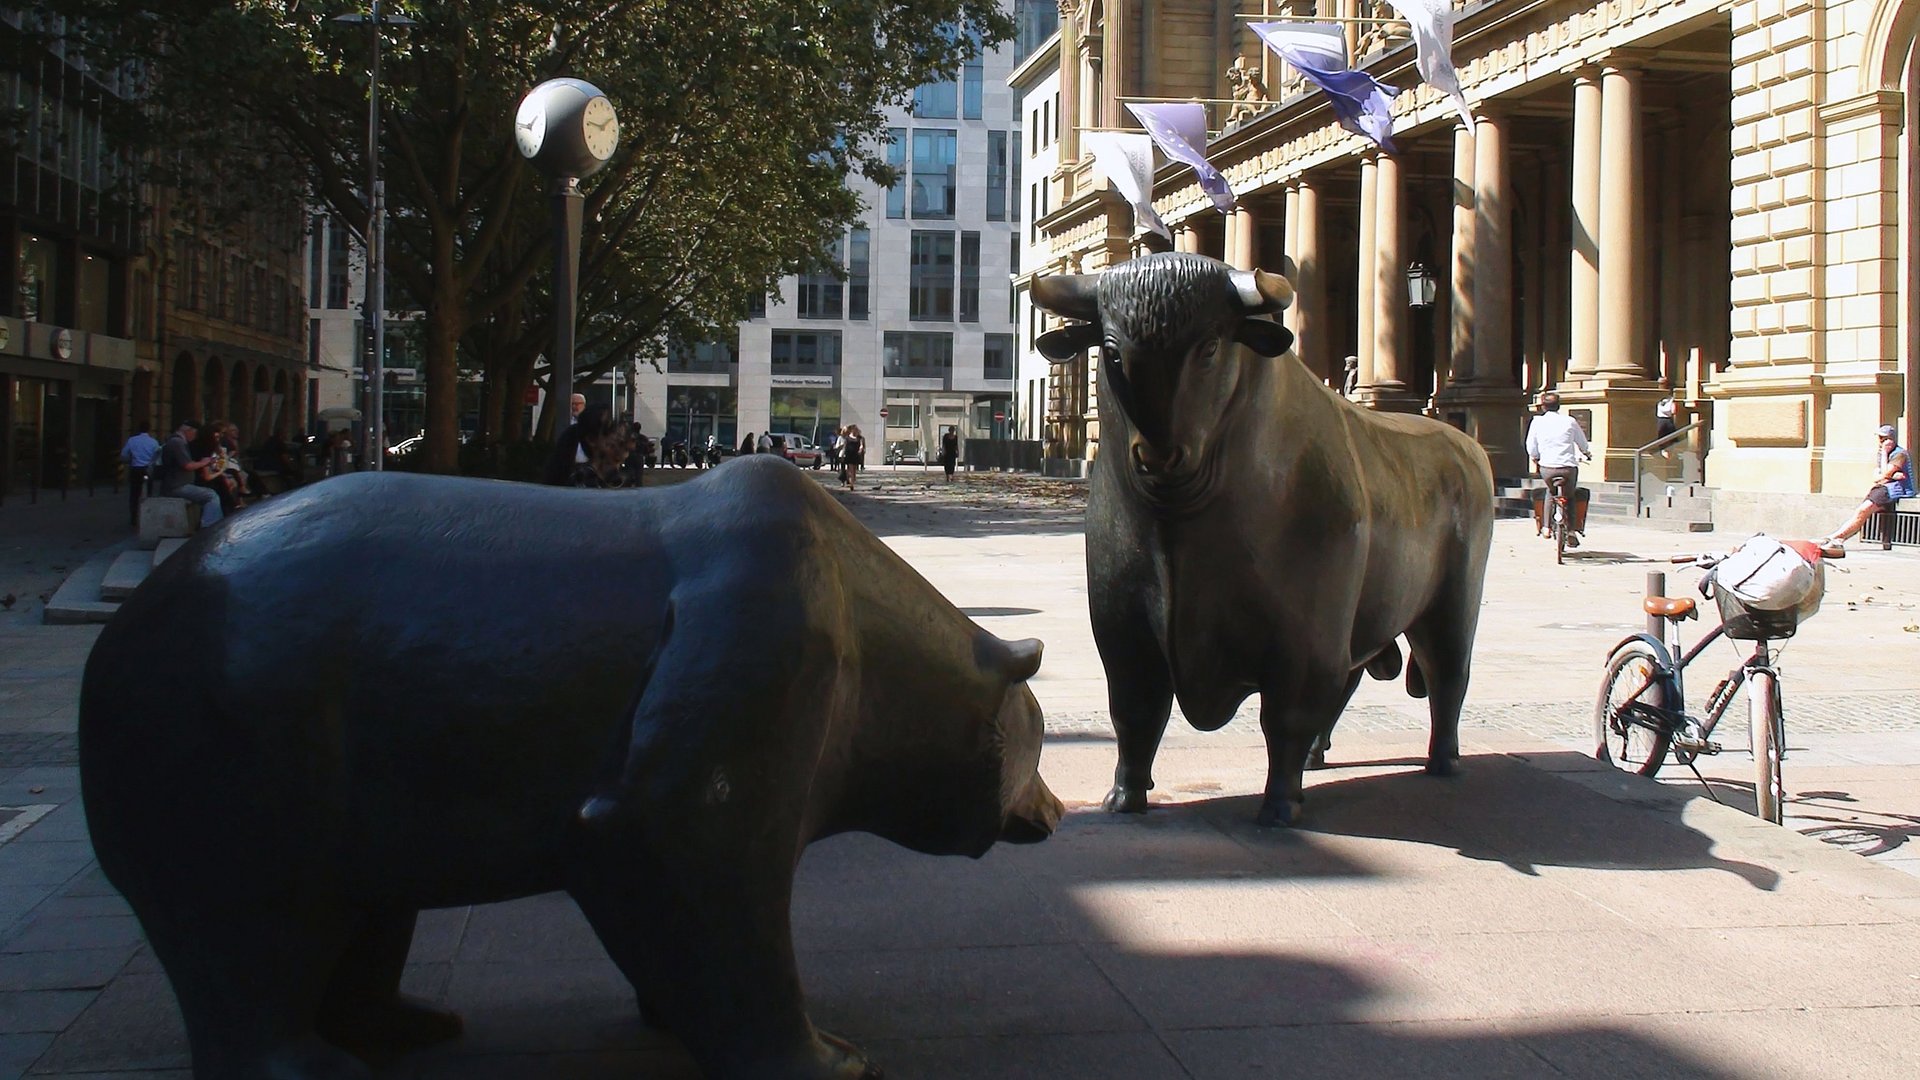 Sculpture Bull and Bear by Reinhard Dachlauer in front of the Frankfurt stock exchange.